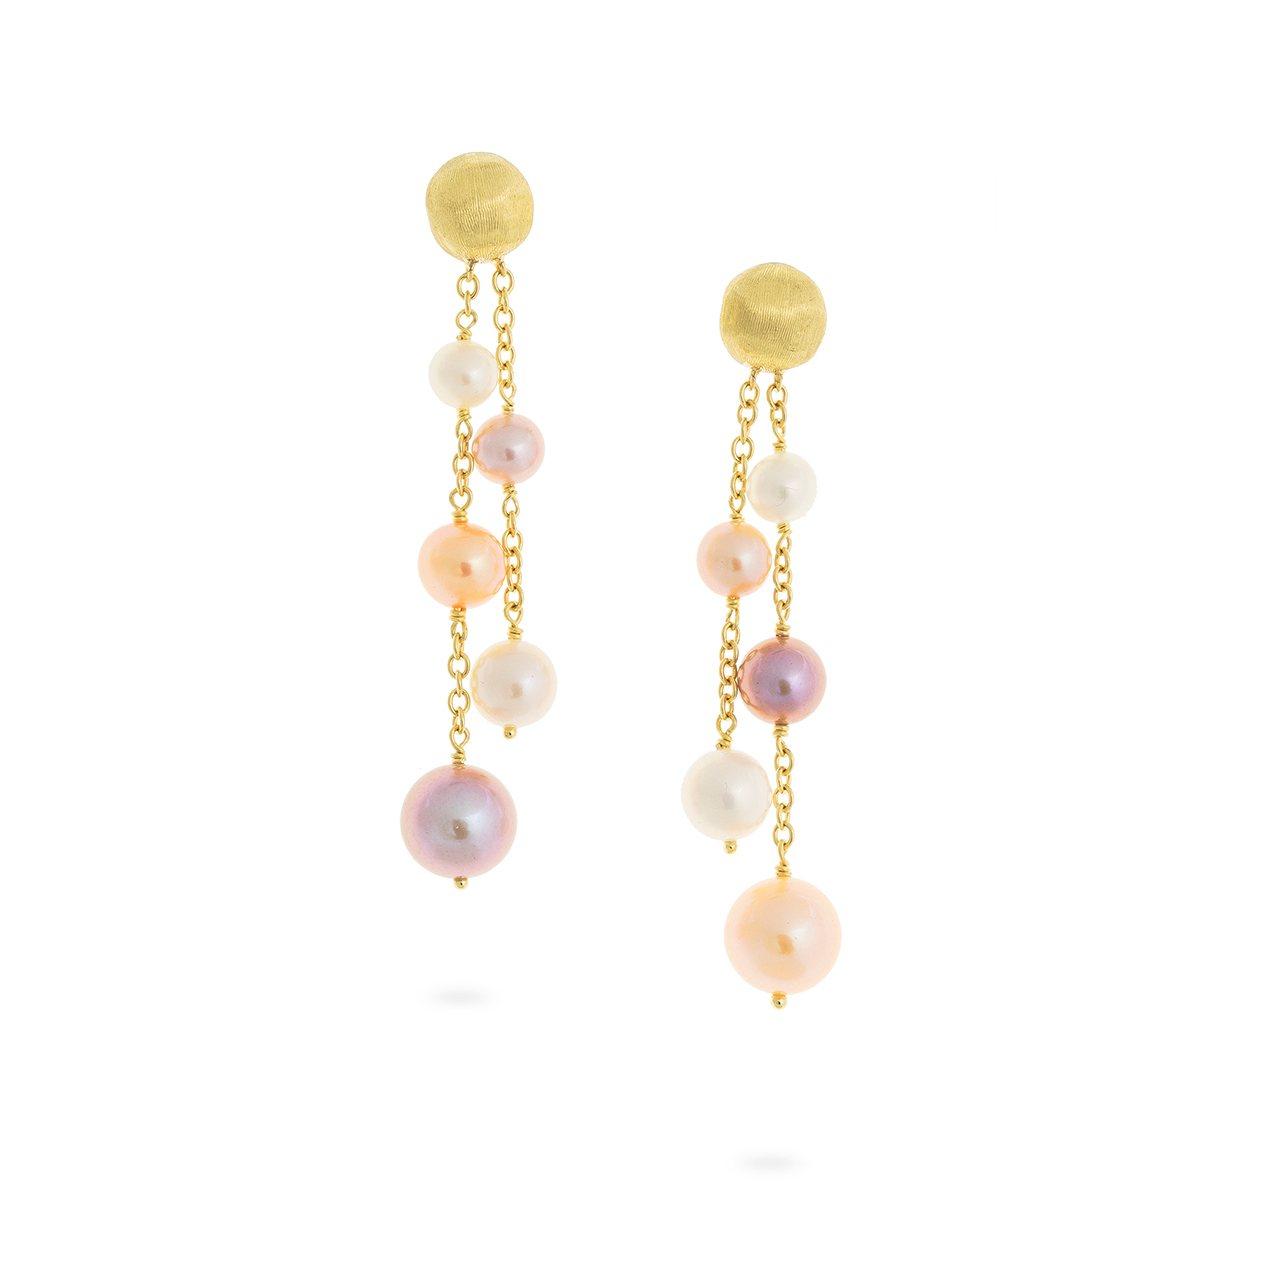 Marco Bicego Africa Yellow Gold & Multi-Colored Pearl Double Drop Earrings